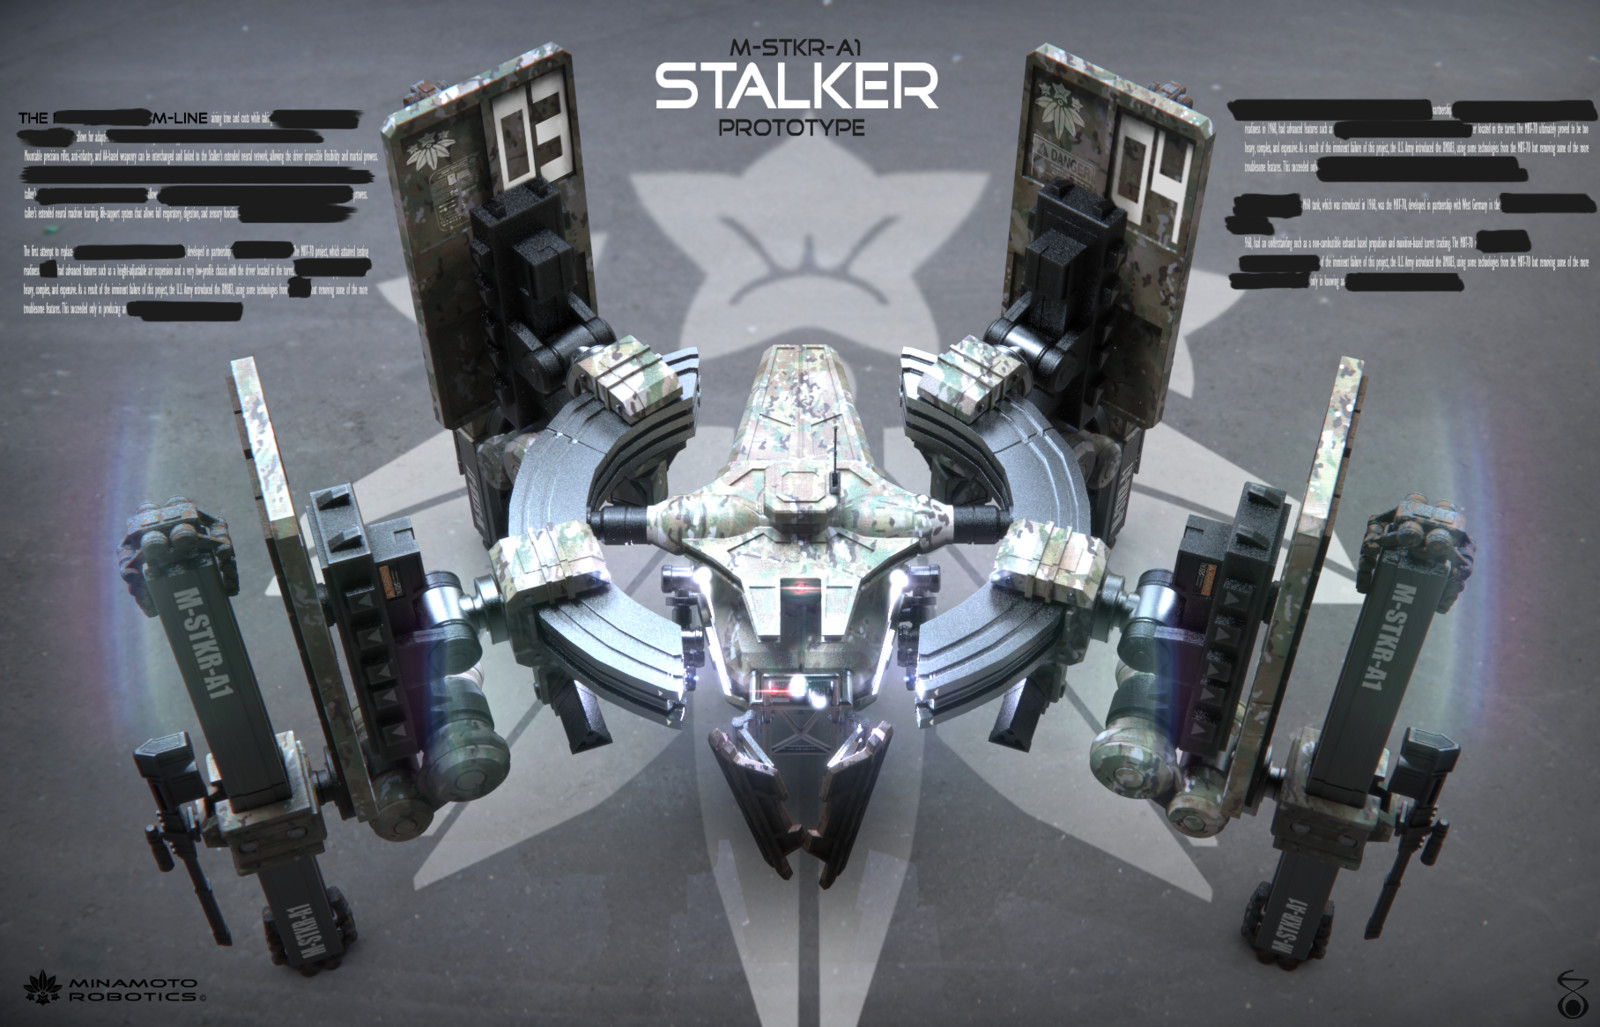 The Stalker was the last human-piloted weapon manufactured by Minamoto Robotics before the company was managed by Michael Minamoto's daughter, and Neuro-technologist, Kym Minamoto.